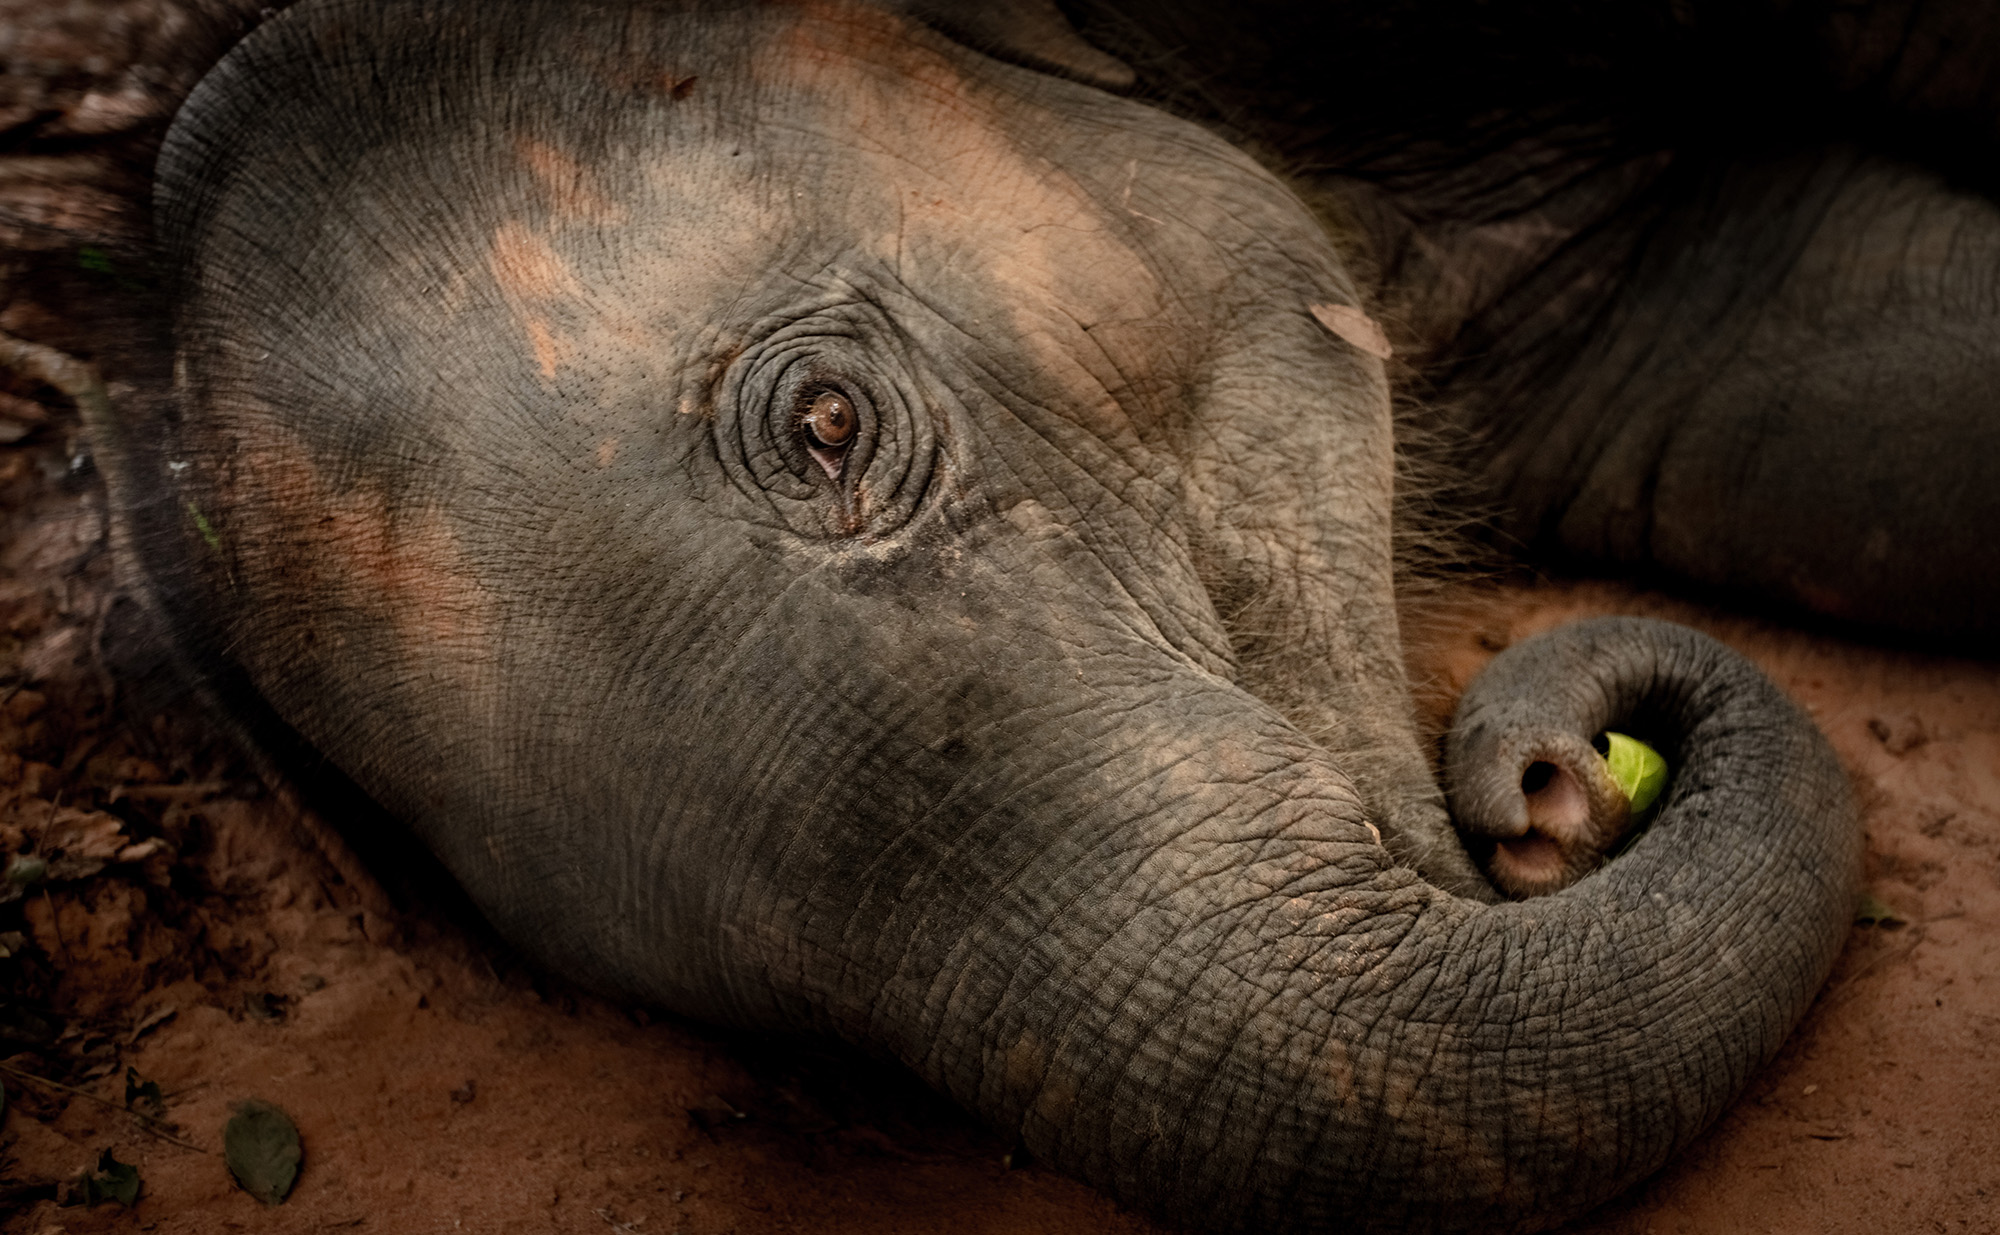 Saving starving elephants in Asian sanctuaries and parks